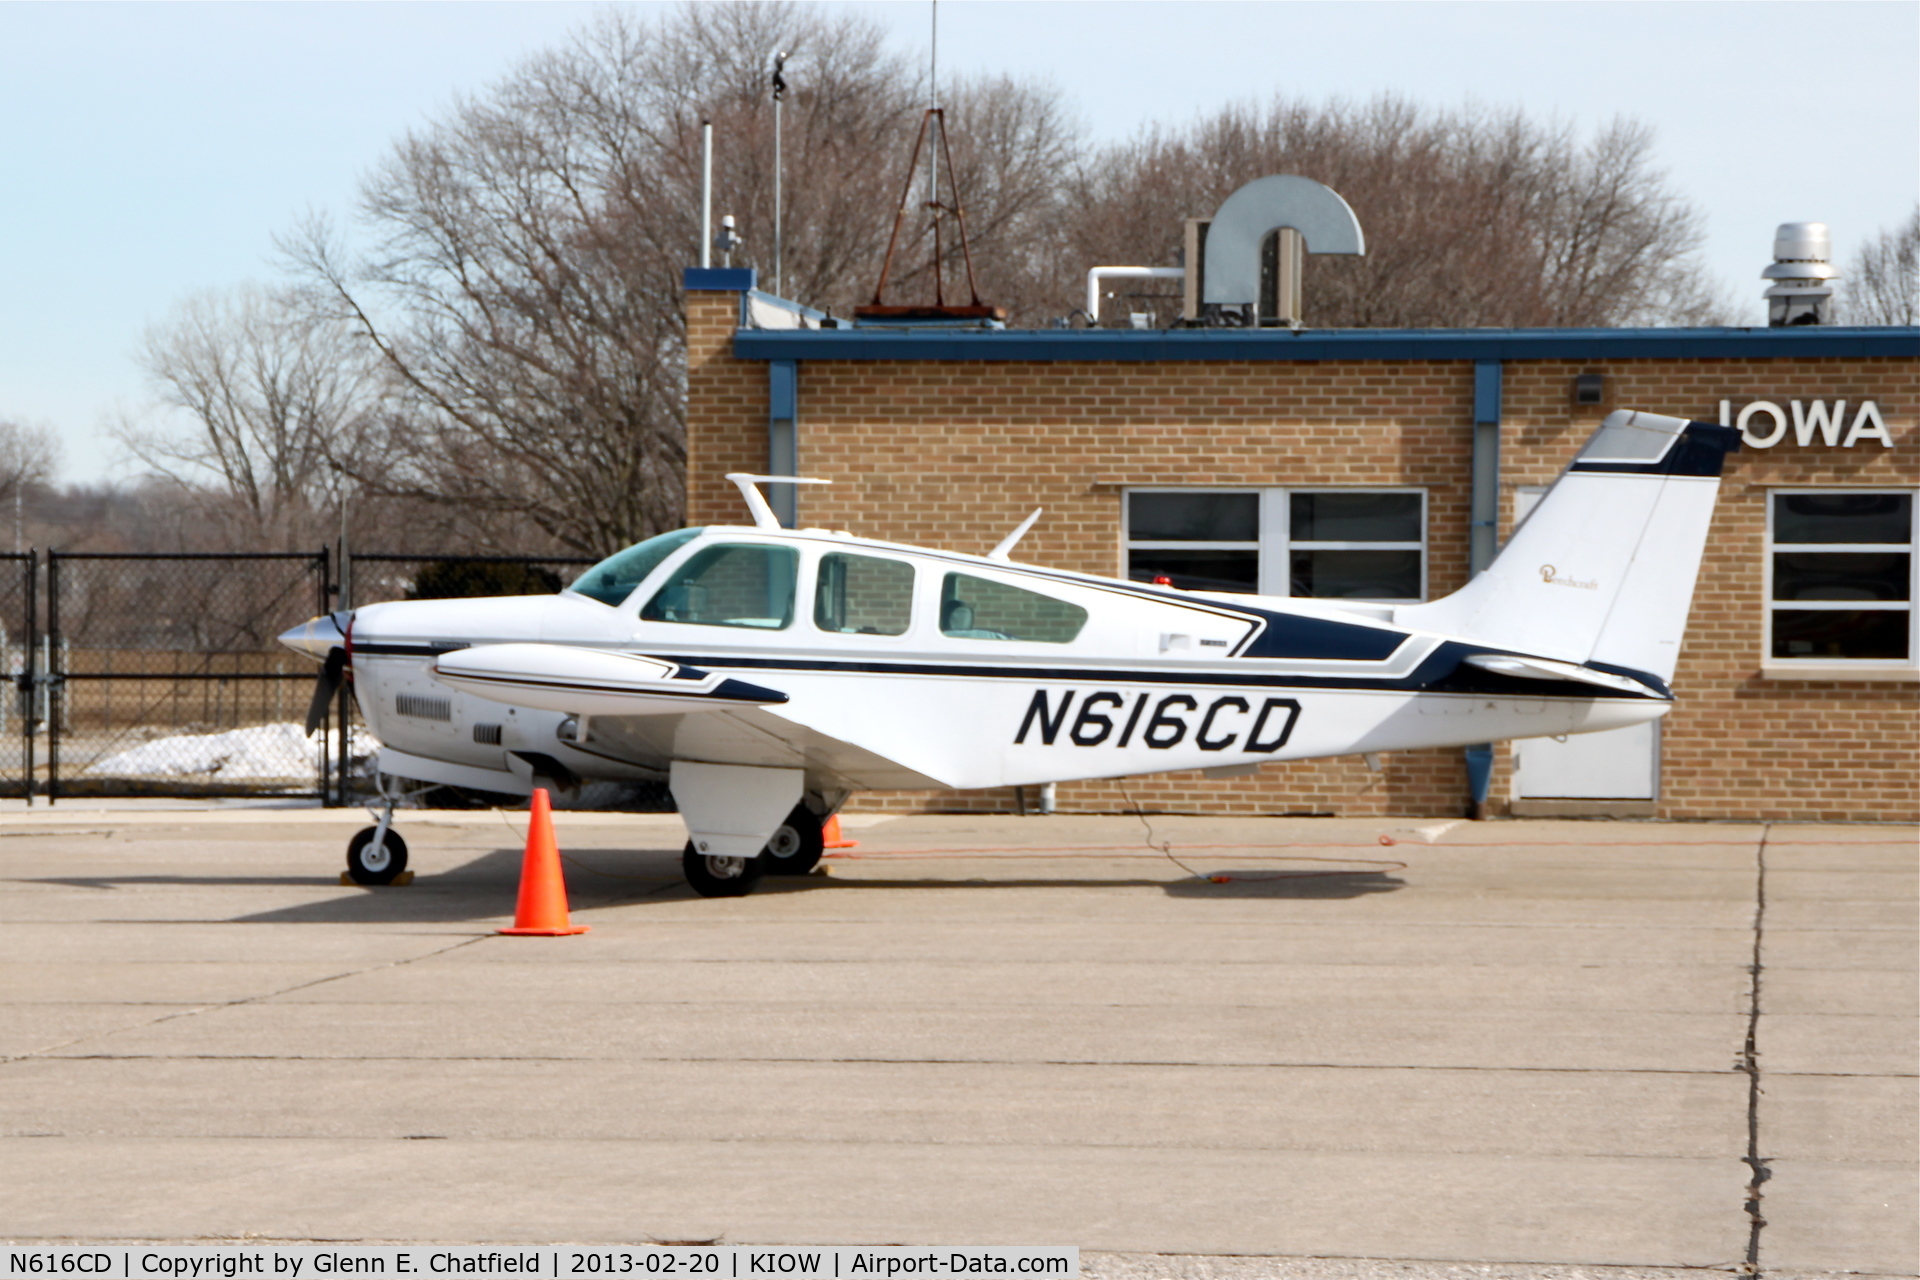 N616CD, 1973 Beech F33A Bonanza C/N CE-455, Parked in front of the terminal